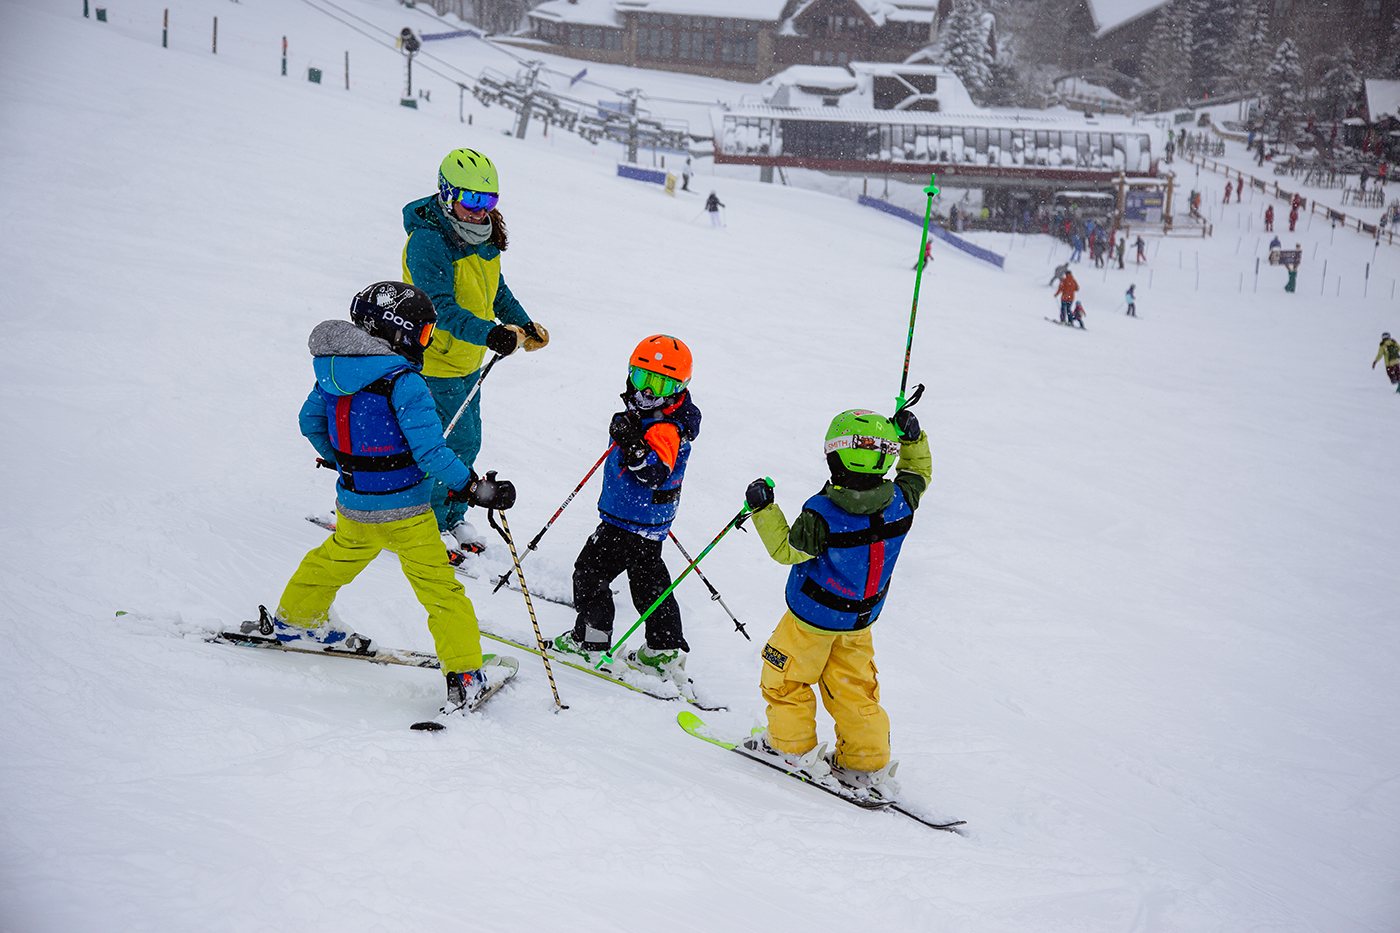 5 Reasons to Take a Ski or Snowboard Lesson This Spring to Have More Fun